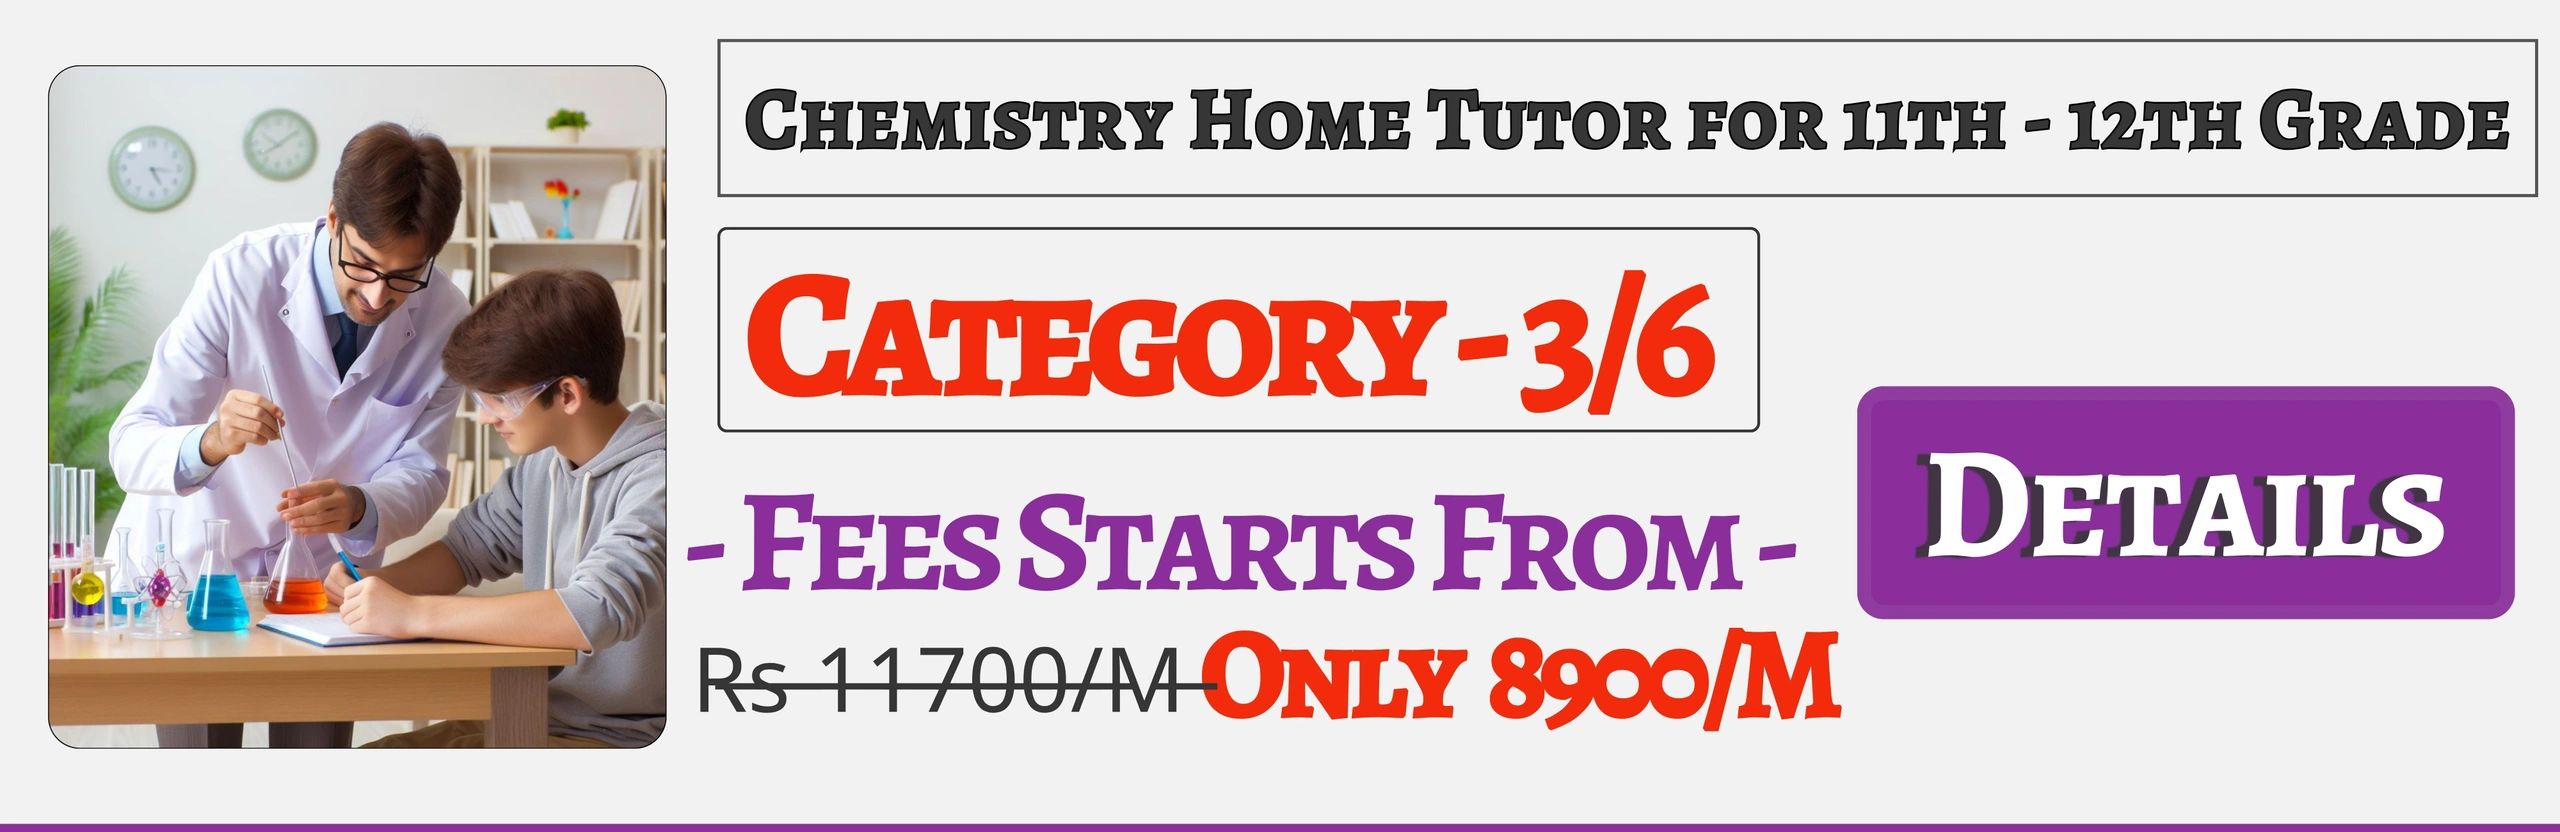 Book Best Nearby Chemistry Home Tuition Tutors For 11th & 12th In Jaipur , Fees Only 8900/M